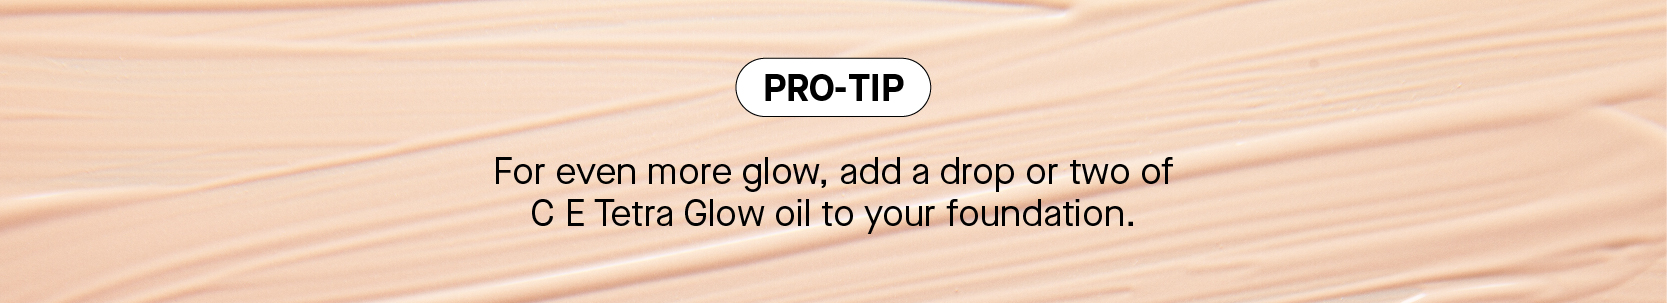 For even more glow, add a drop or two of C E Tetra Glow oil to your foundation. 